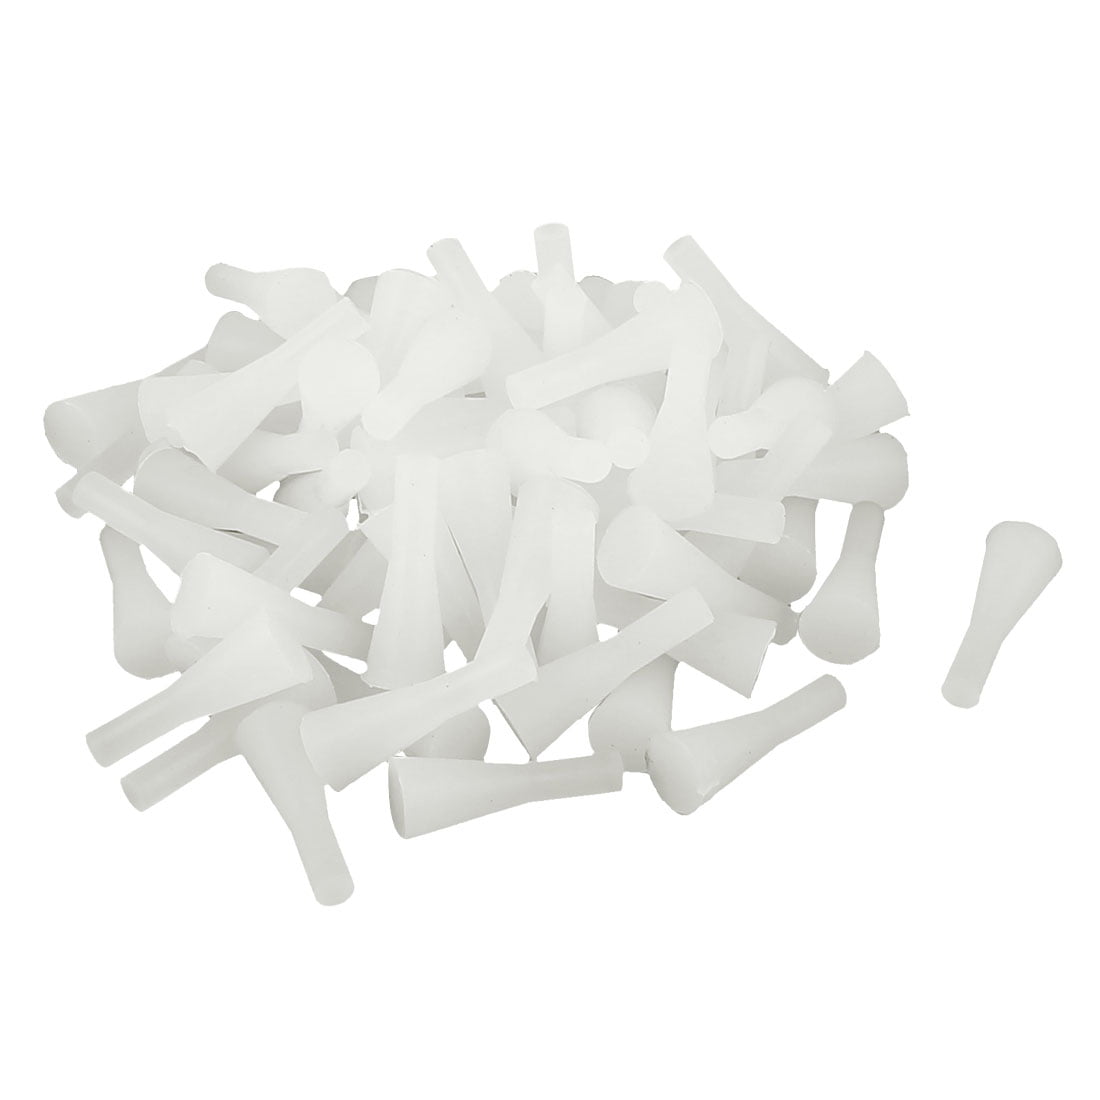 21mmx7.5mmx4mm Silicone Rubber Plug Tapered Stopper Plugs White 80pcs ...